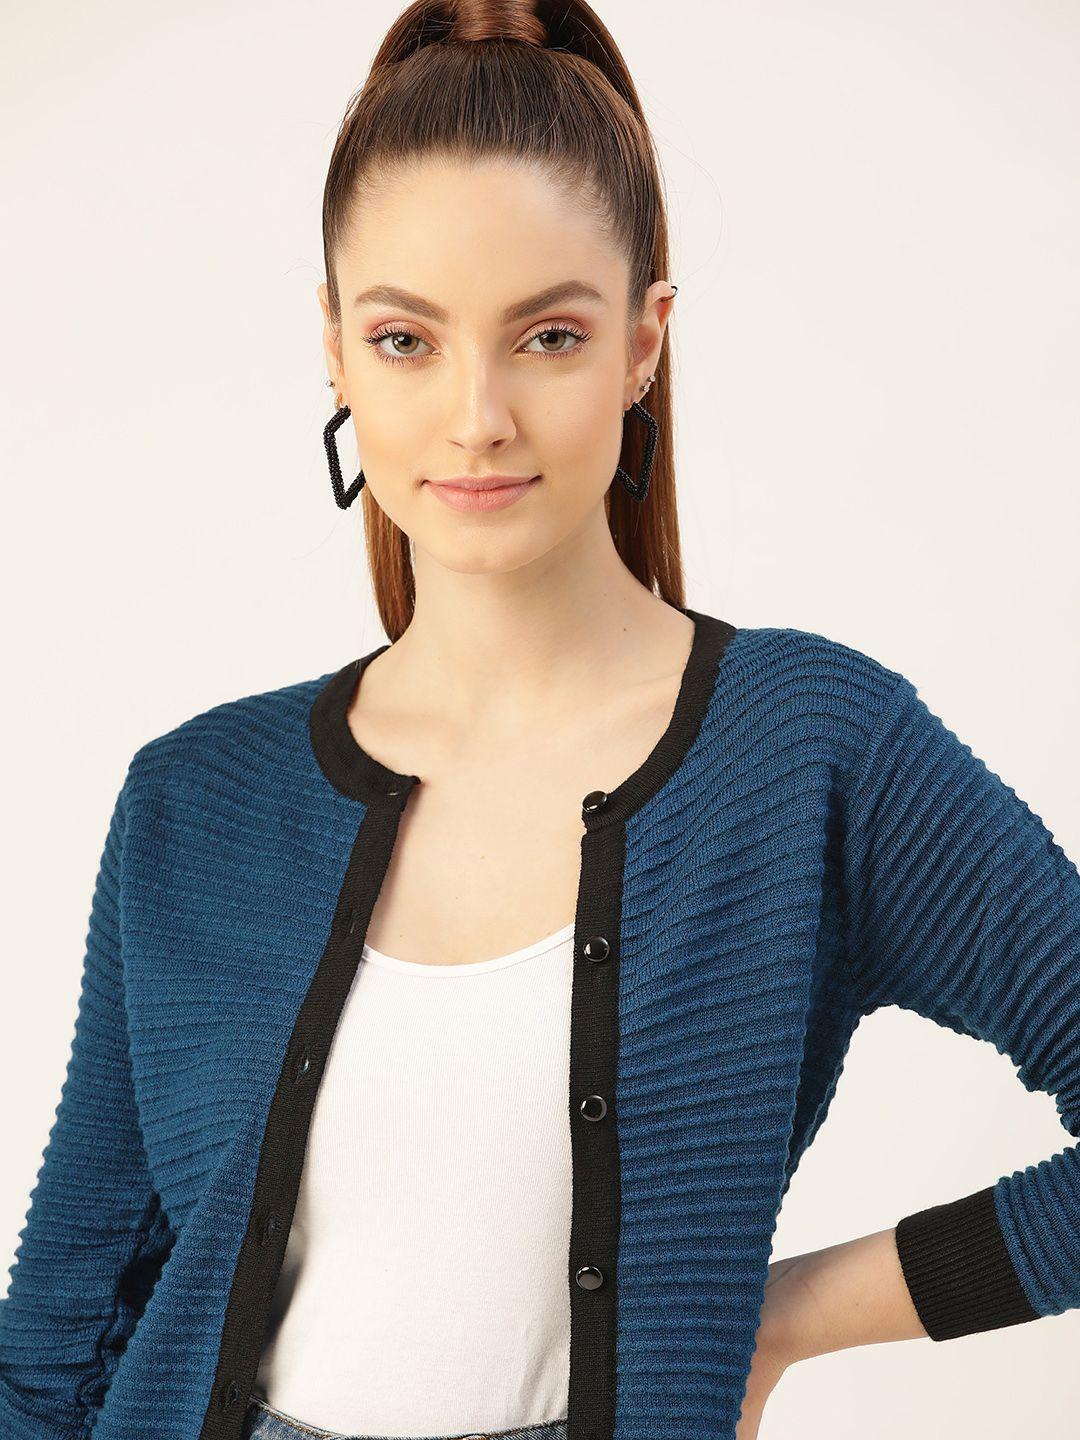 dressberry women teal blue ribbed cardigan